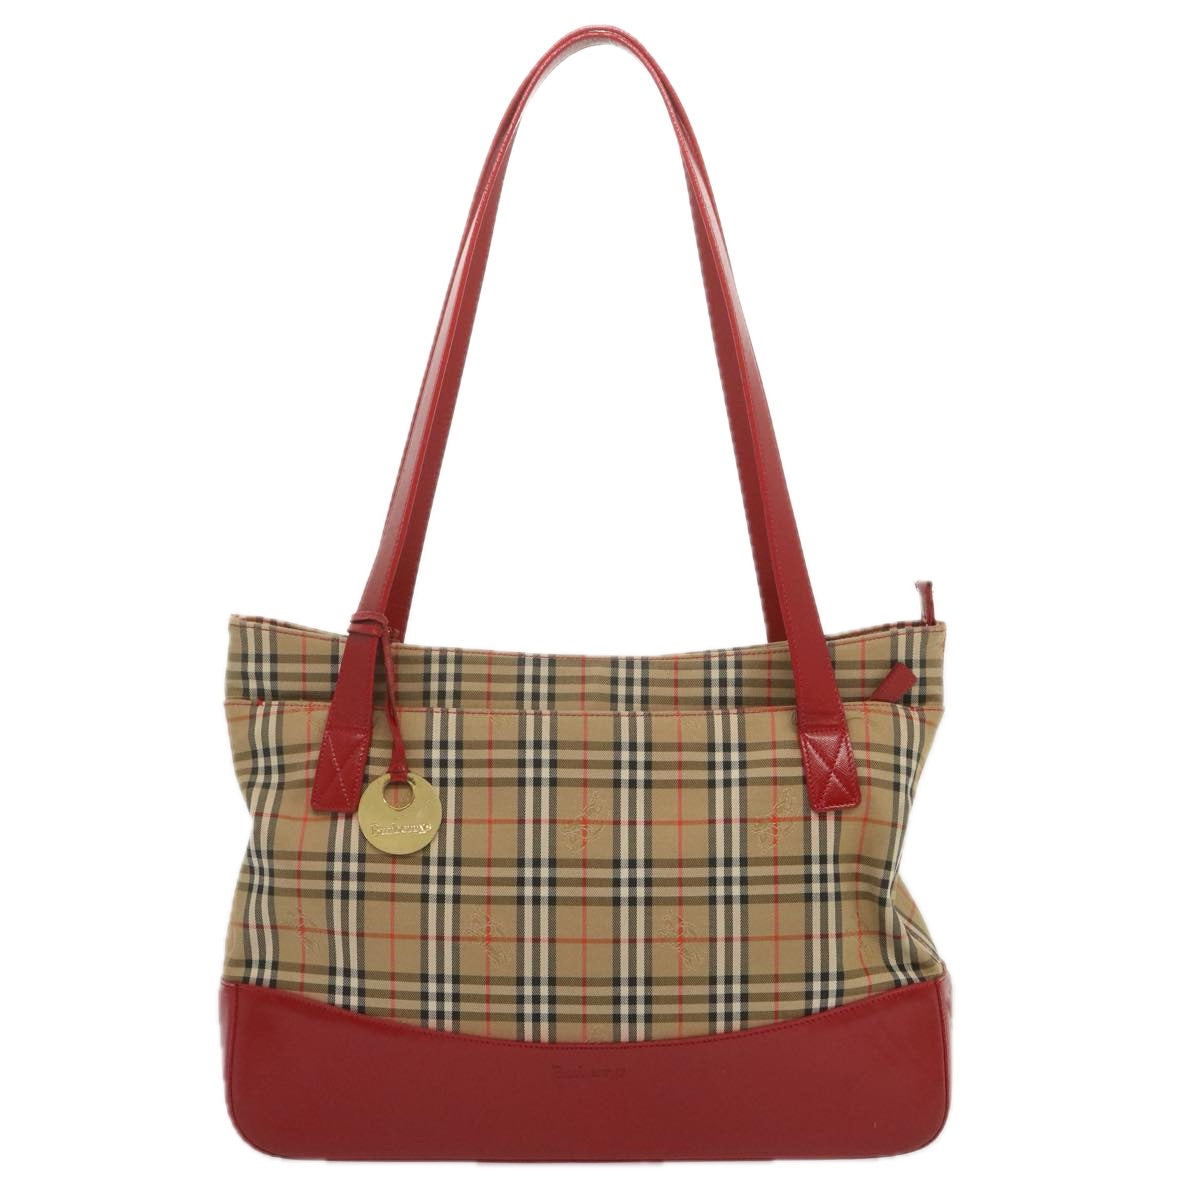 Burberrys Nova Check Tote Bag Canvas Beige Red Auth 68740 - 0